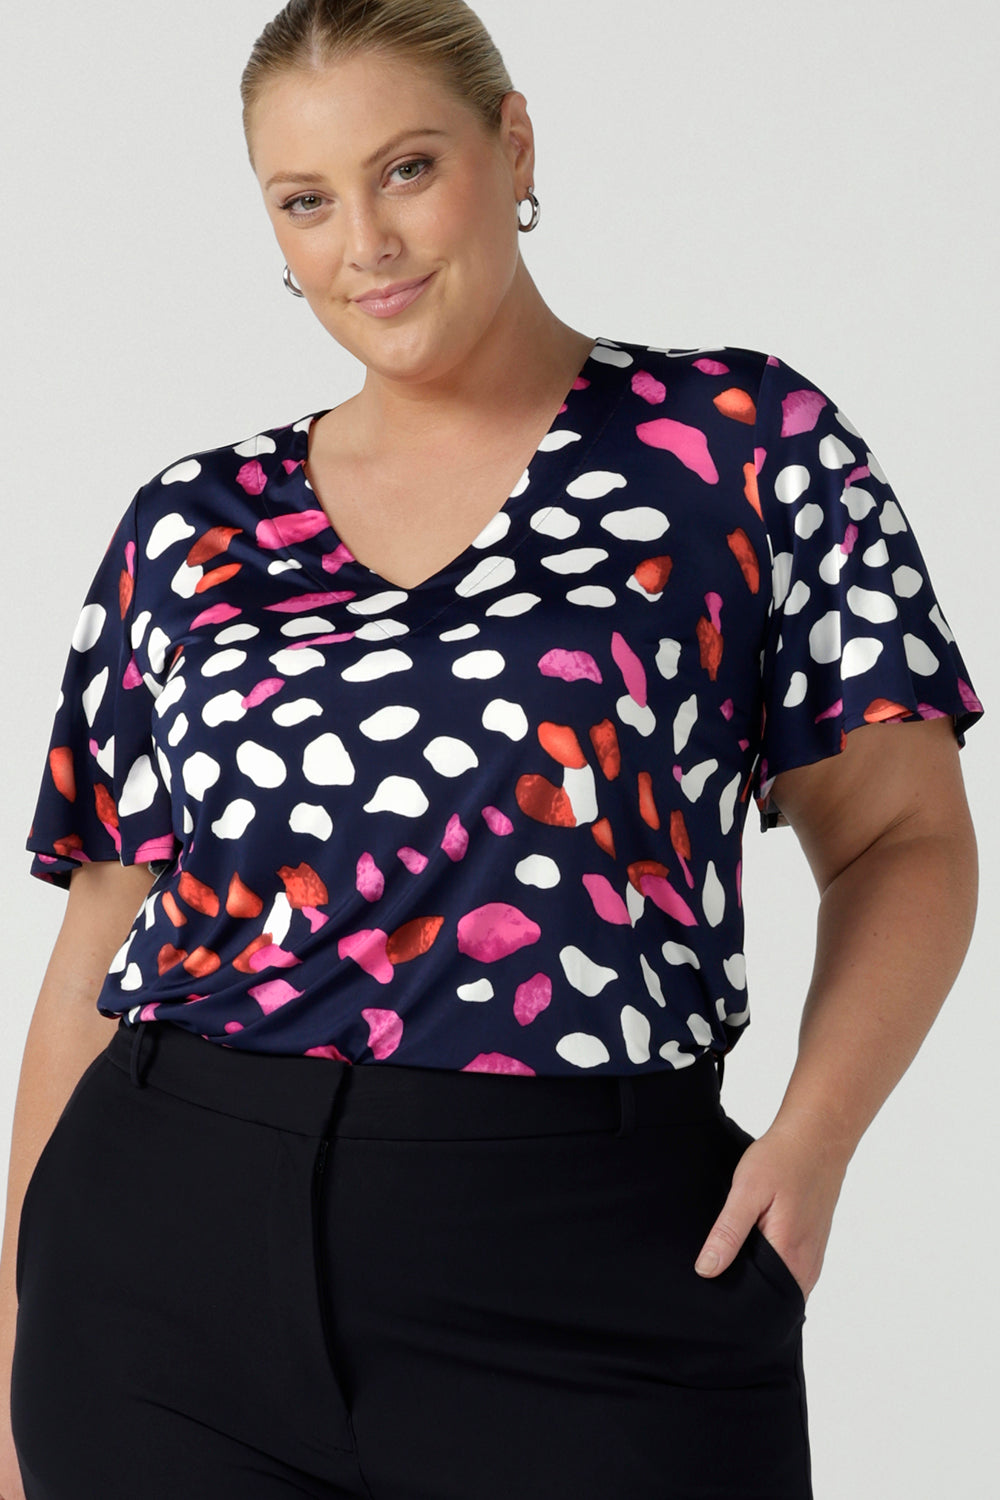 A plus size, size 18 woman wears a abstract print jersey, V-neck top with flutter sleeves. A good top for summer casual wear, or style tucked as a workwear top. Shop made in Australia tops in petite to plus sizes online at Australian fashion brand, Leina & Fleur.